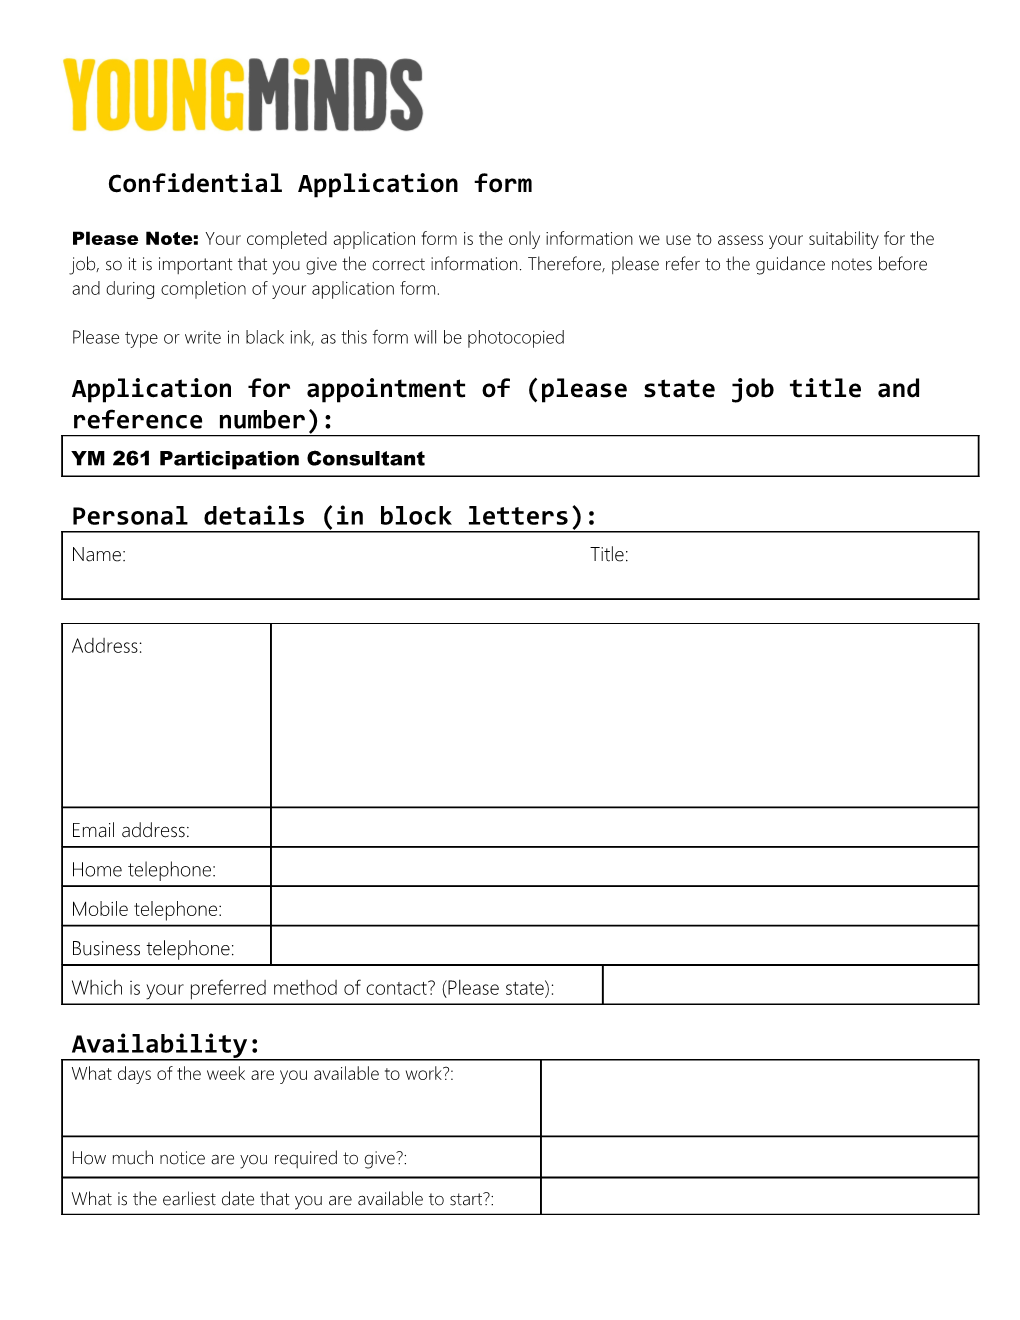 Confidential Application Form s3